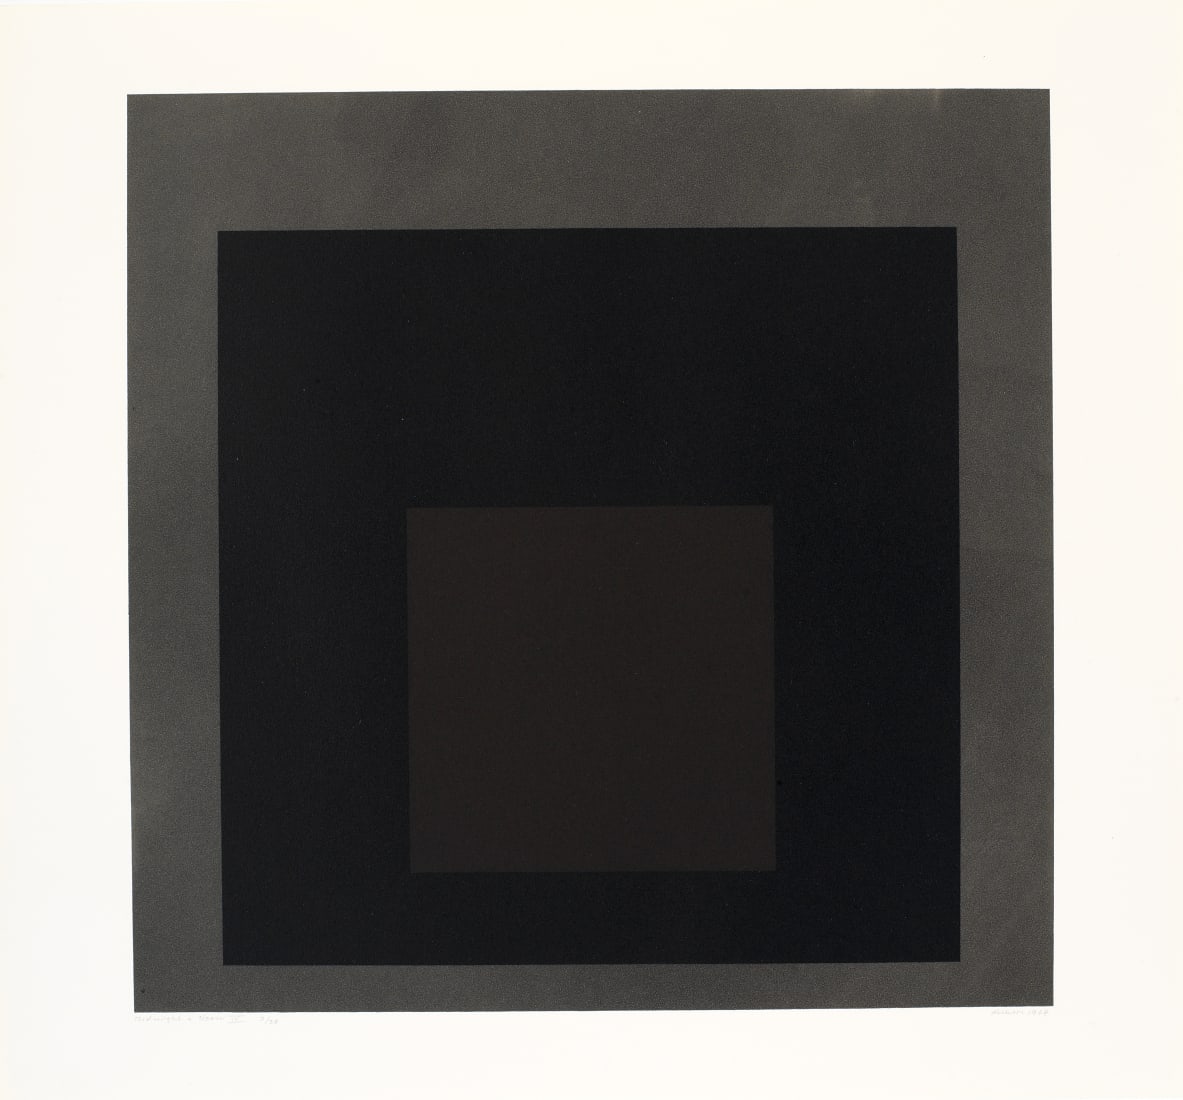 <p><span class="artist"><strong>Josef Albers</strong></span>, <em>Midnight and Noon IV</em>, 1964</p>